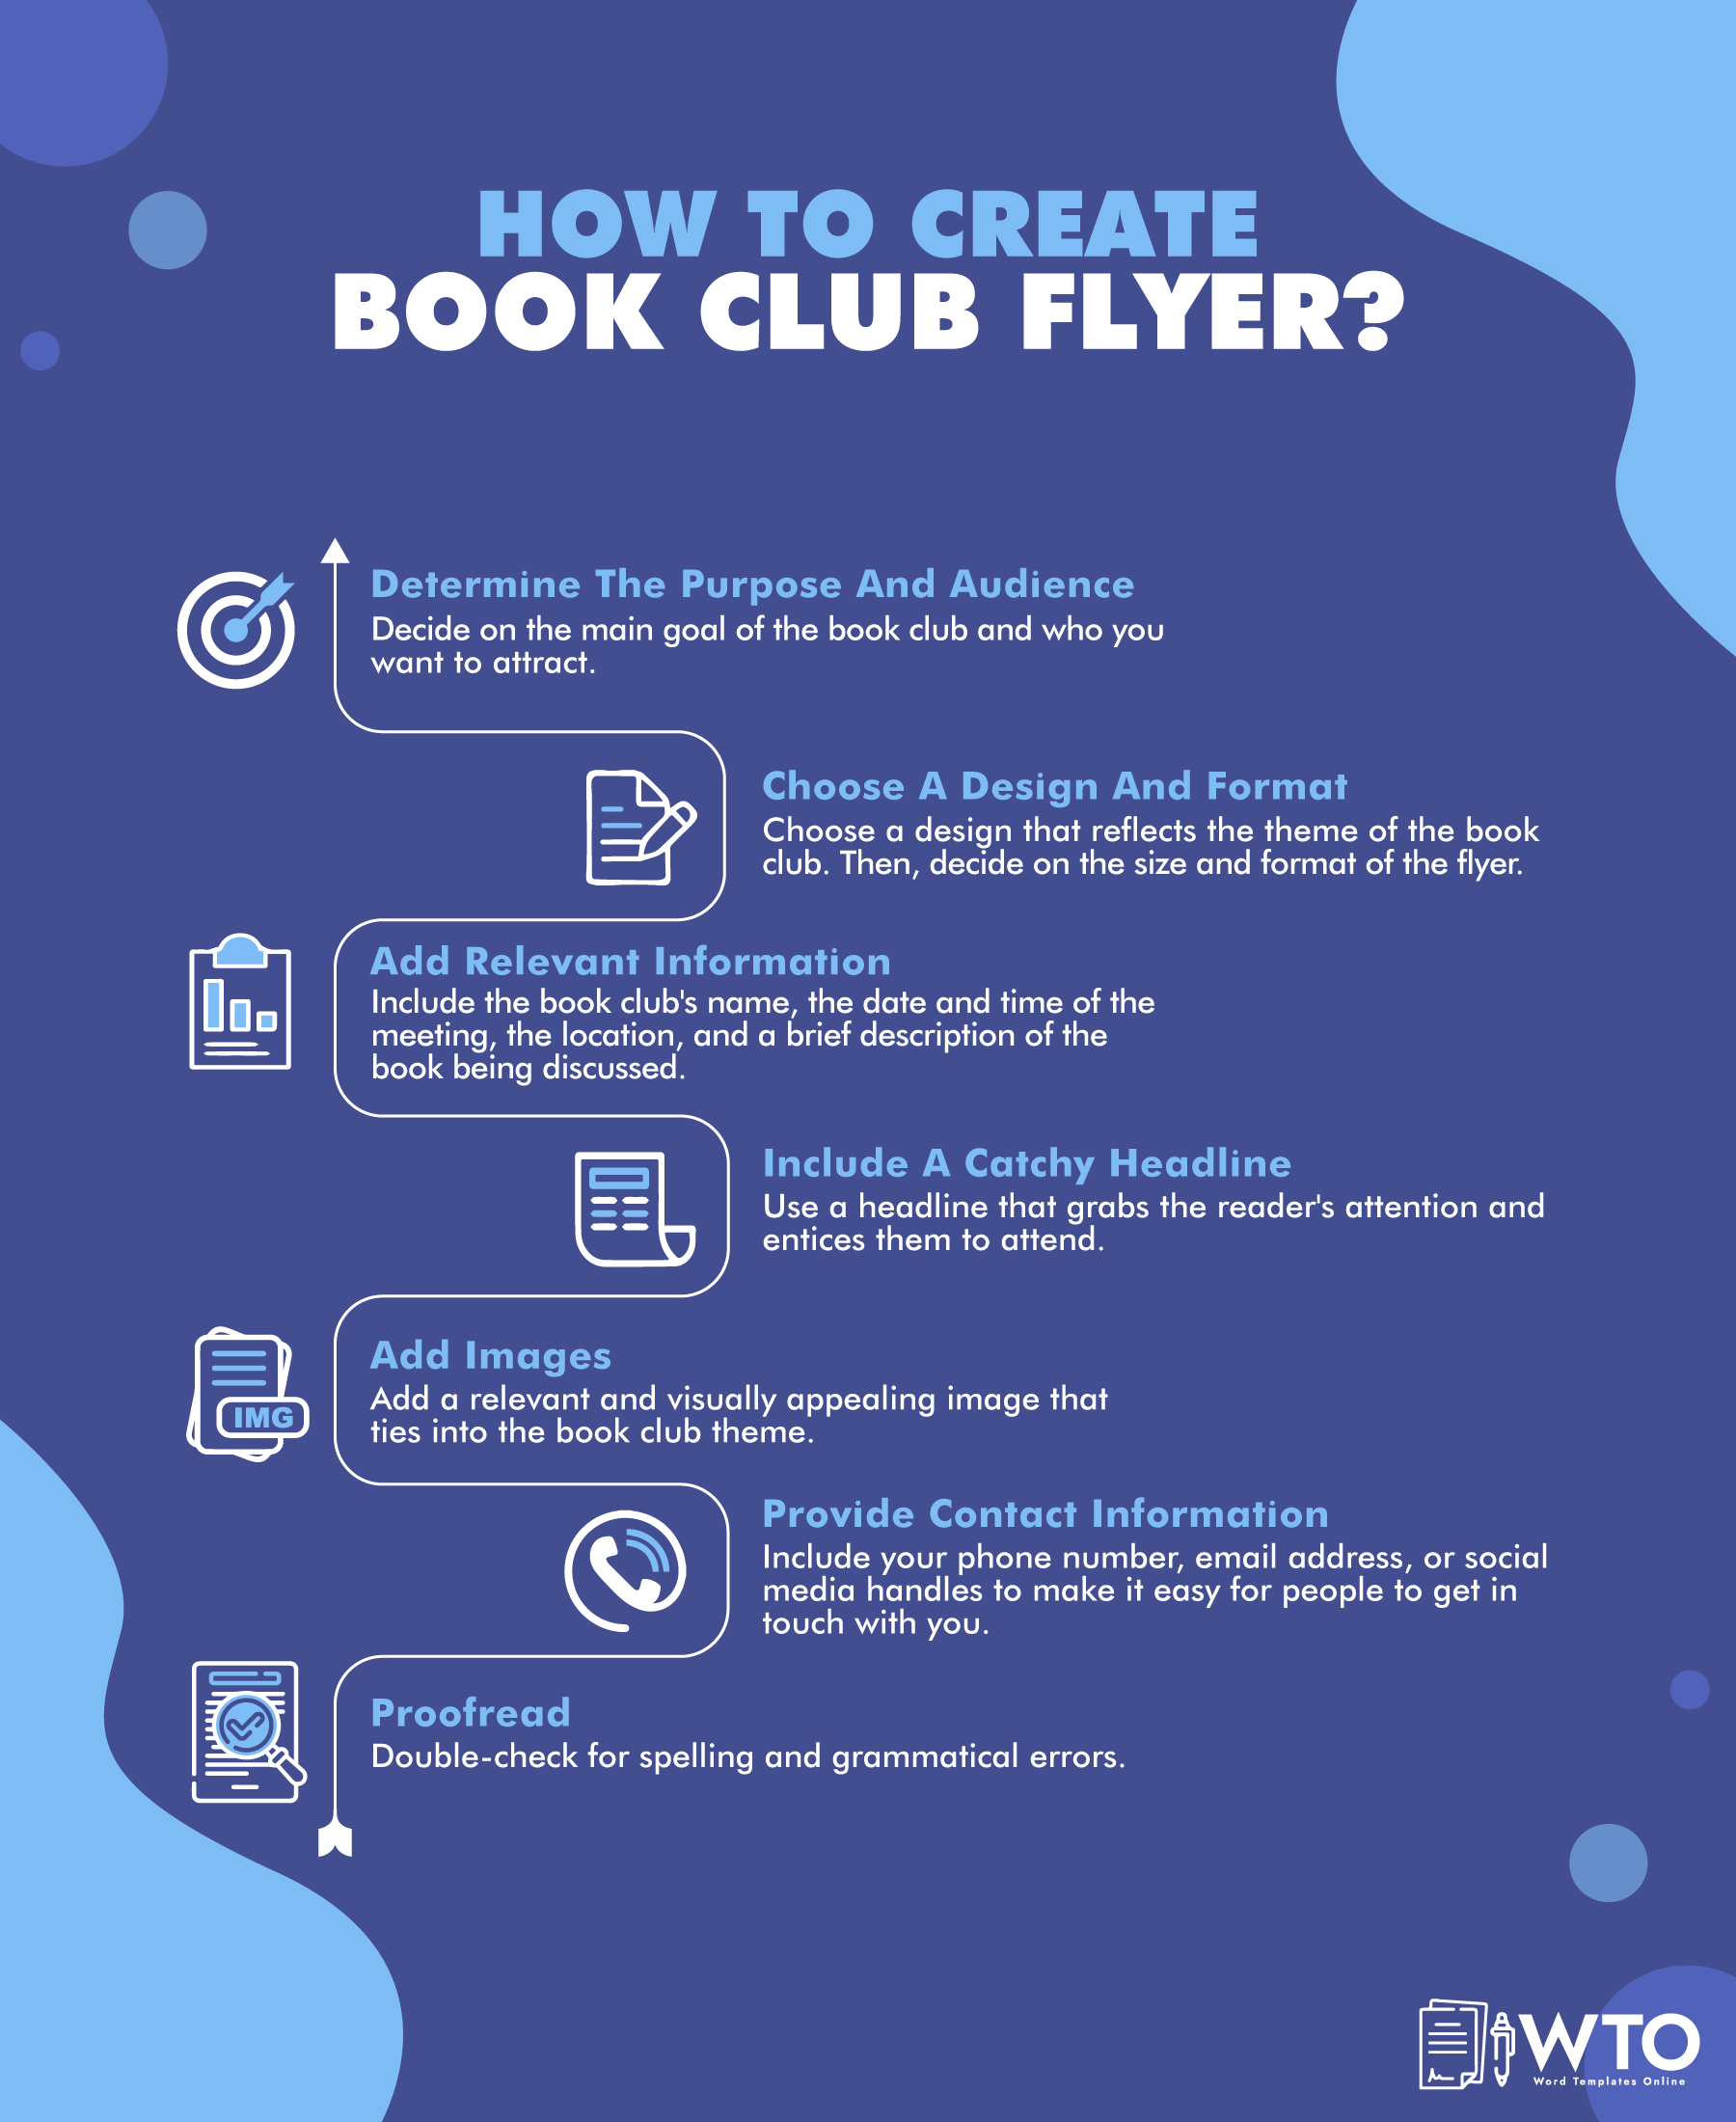 This infographic is about creating a book club flyer.